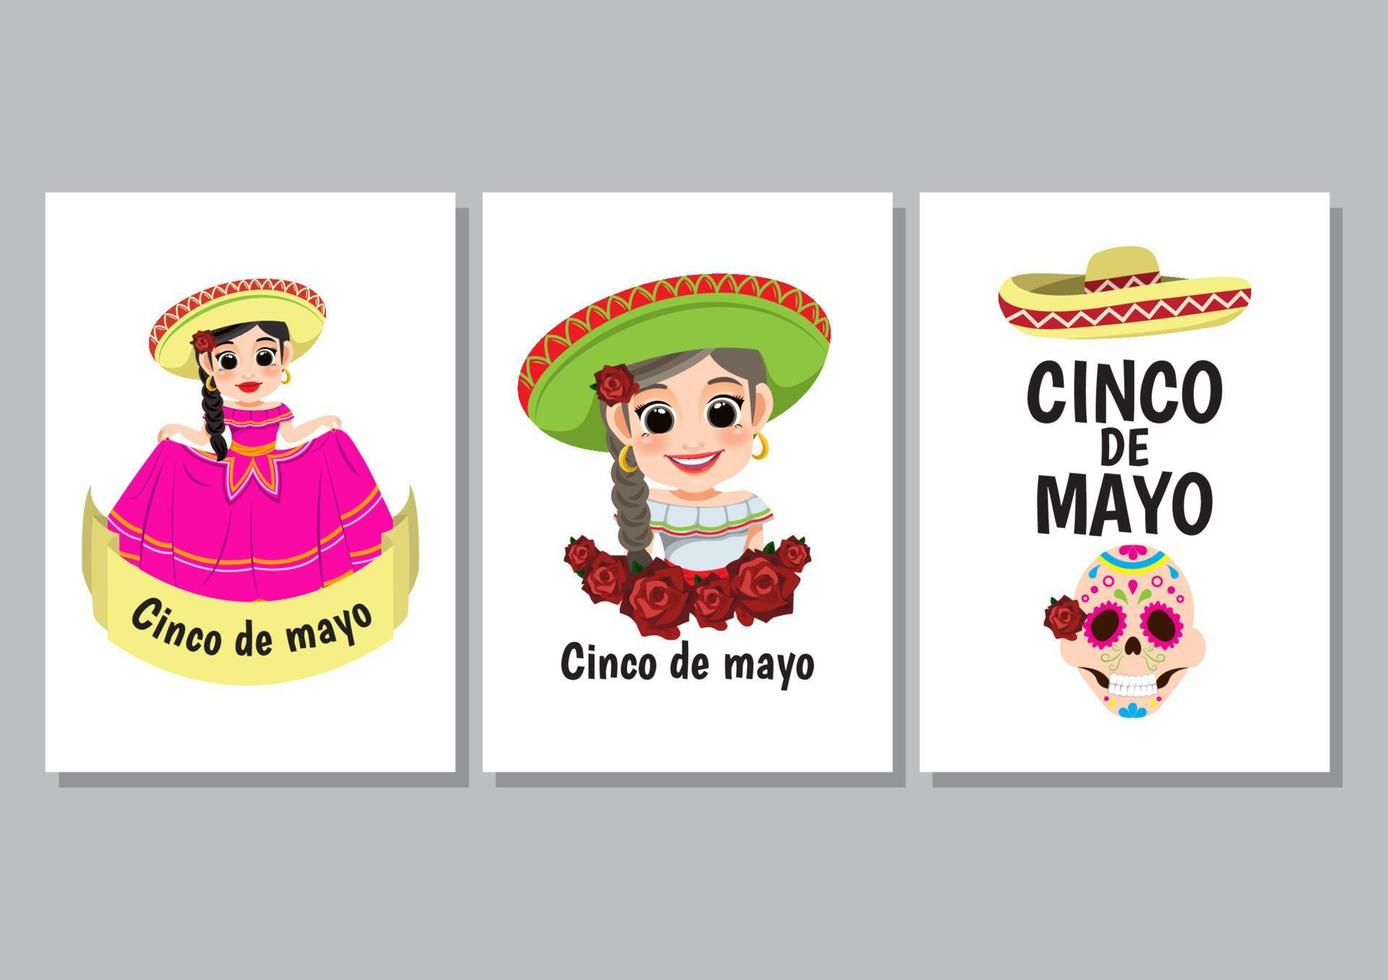 Cinco de Mayo - May 5, federal holiday in Mexico. Cinco de Mayo banner and card design with cartoon character vector